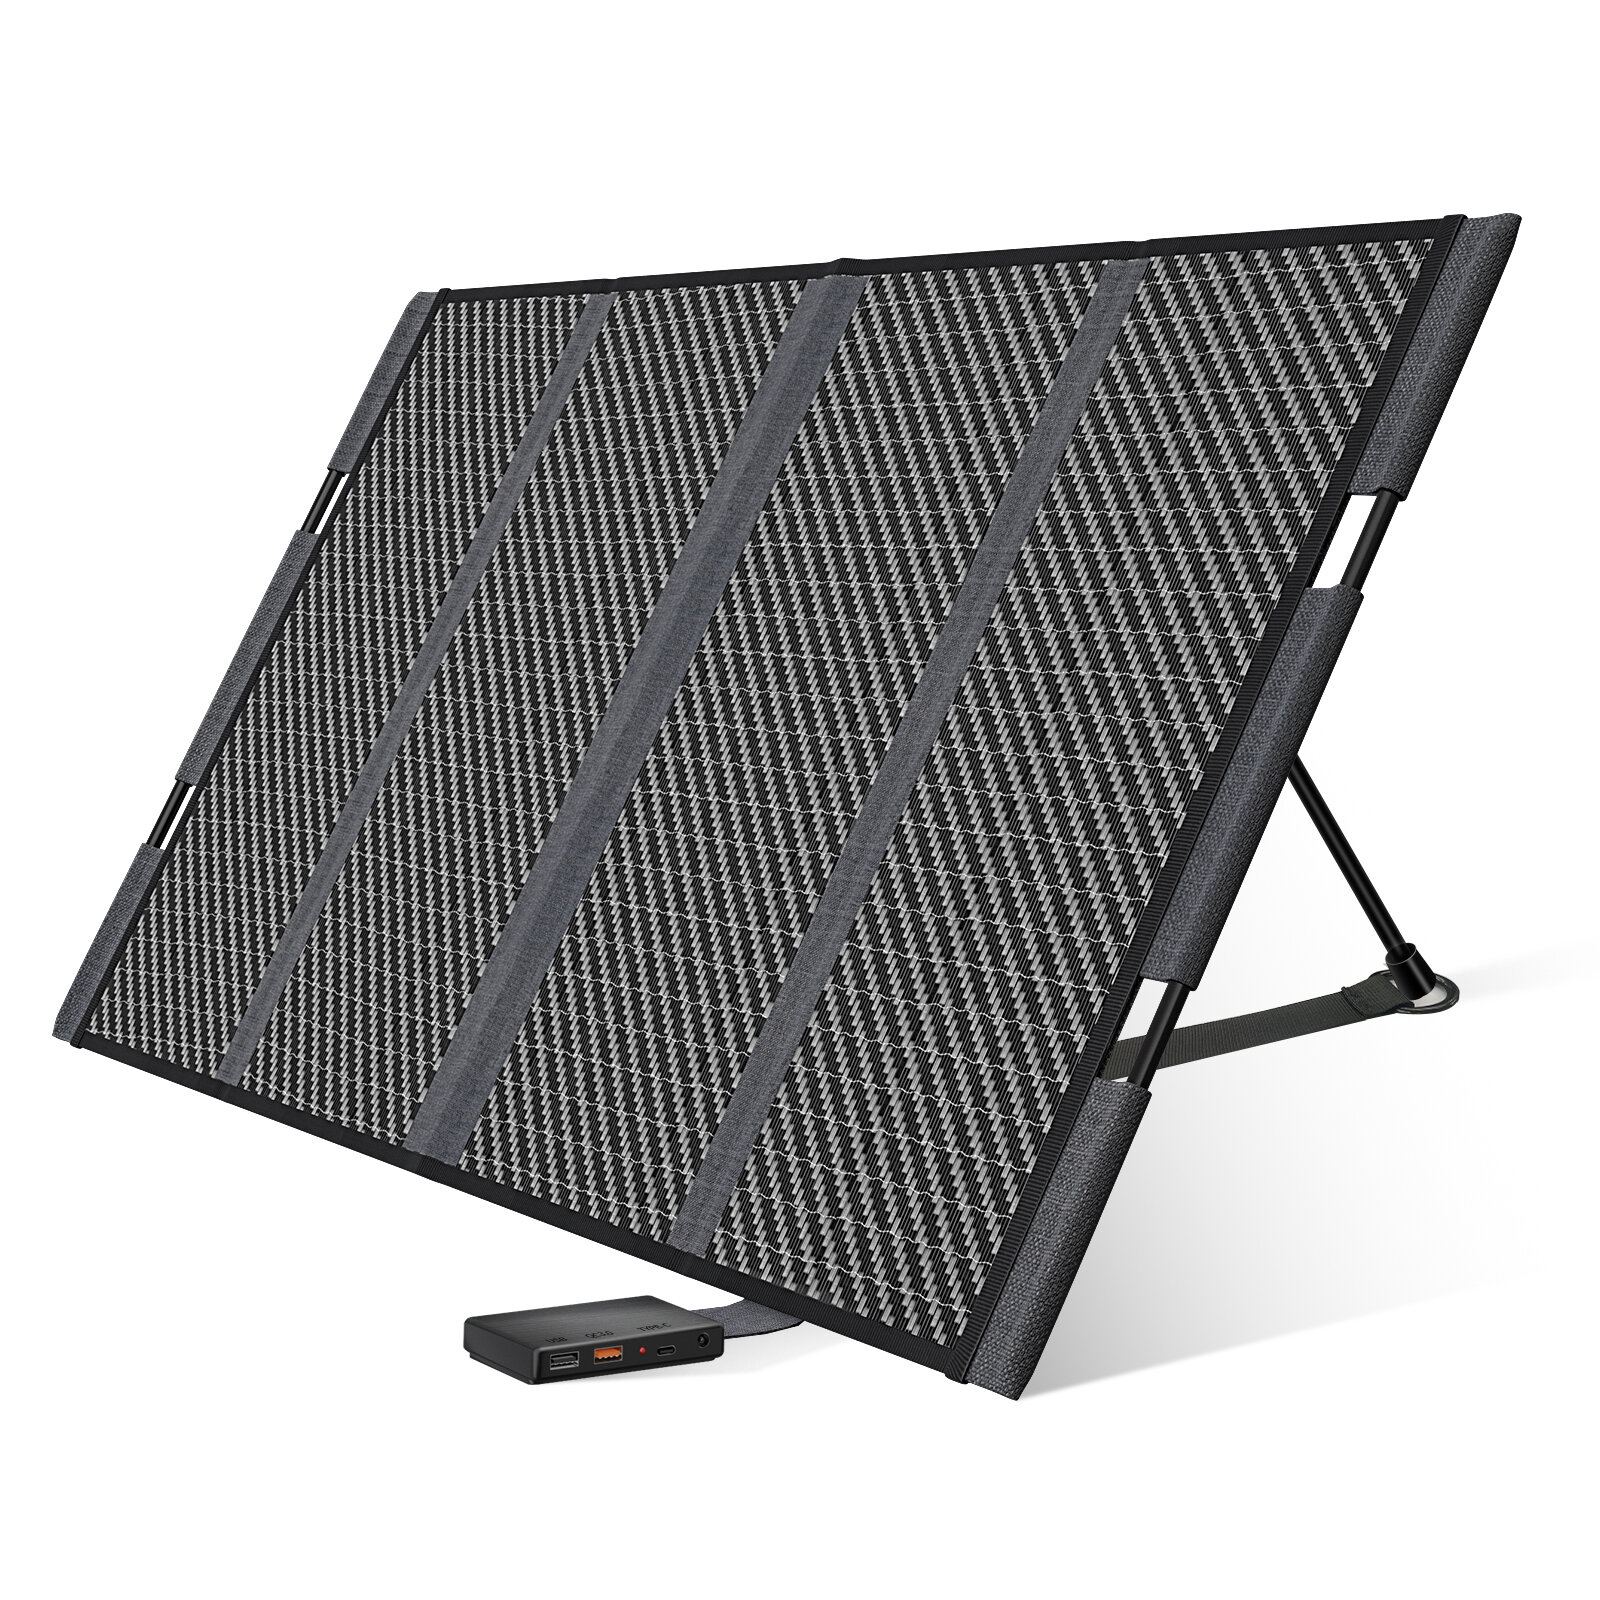 Foursun 18V 100W Portable Solar Panel for Power Station Foldable Shingle IP67 Waterproof Independent Support Rod for Solar Generator Power Bank 12V Car Battery